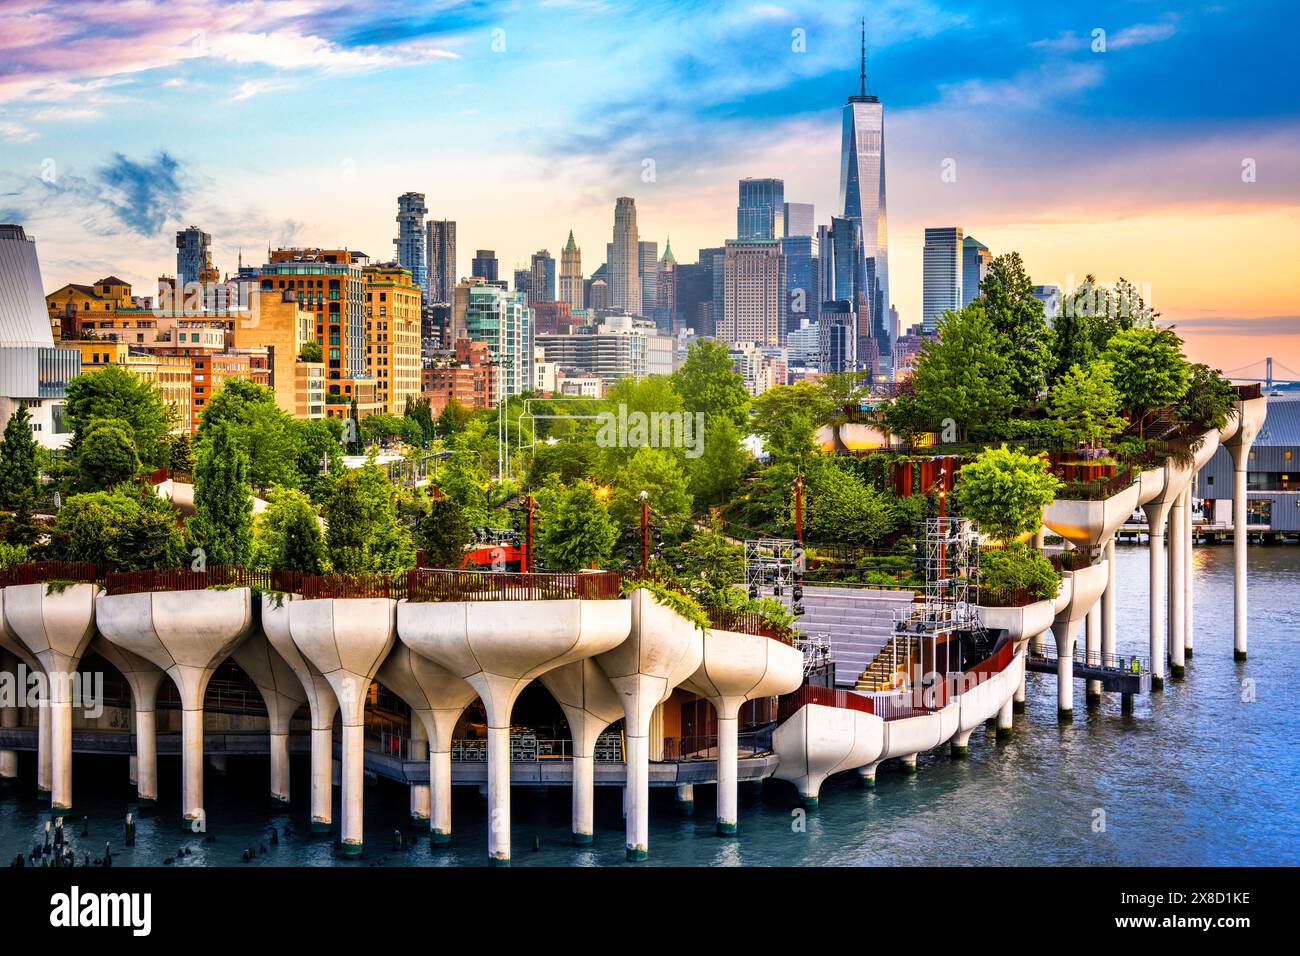 View of Lower Manhattan skyline at sunset, behind the Little Island public park. Stock Photo